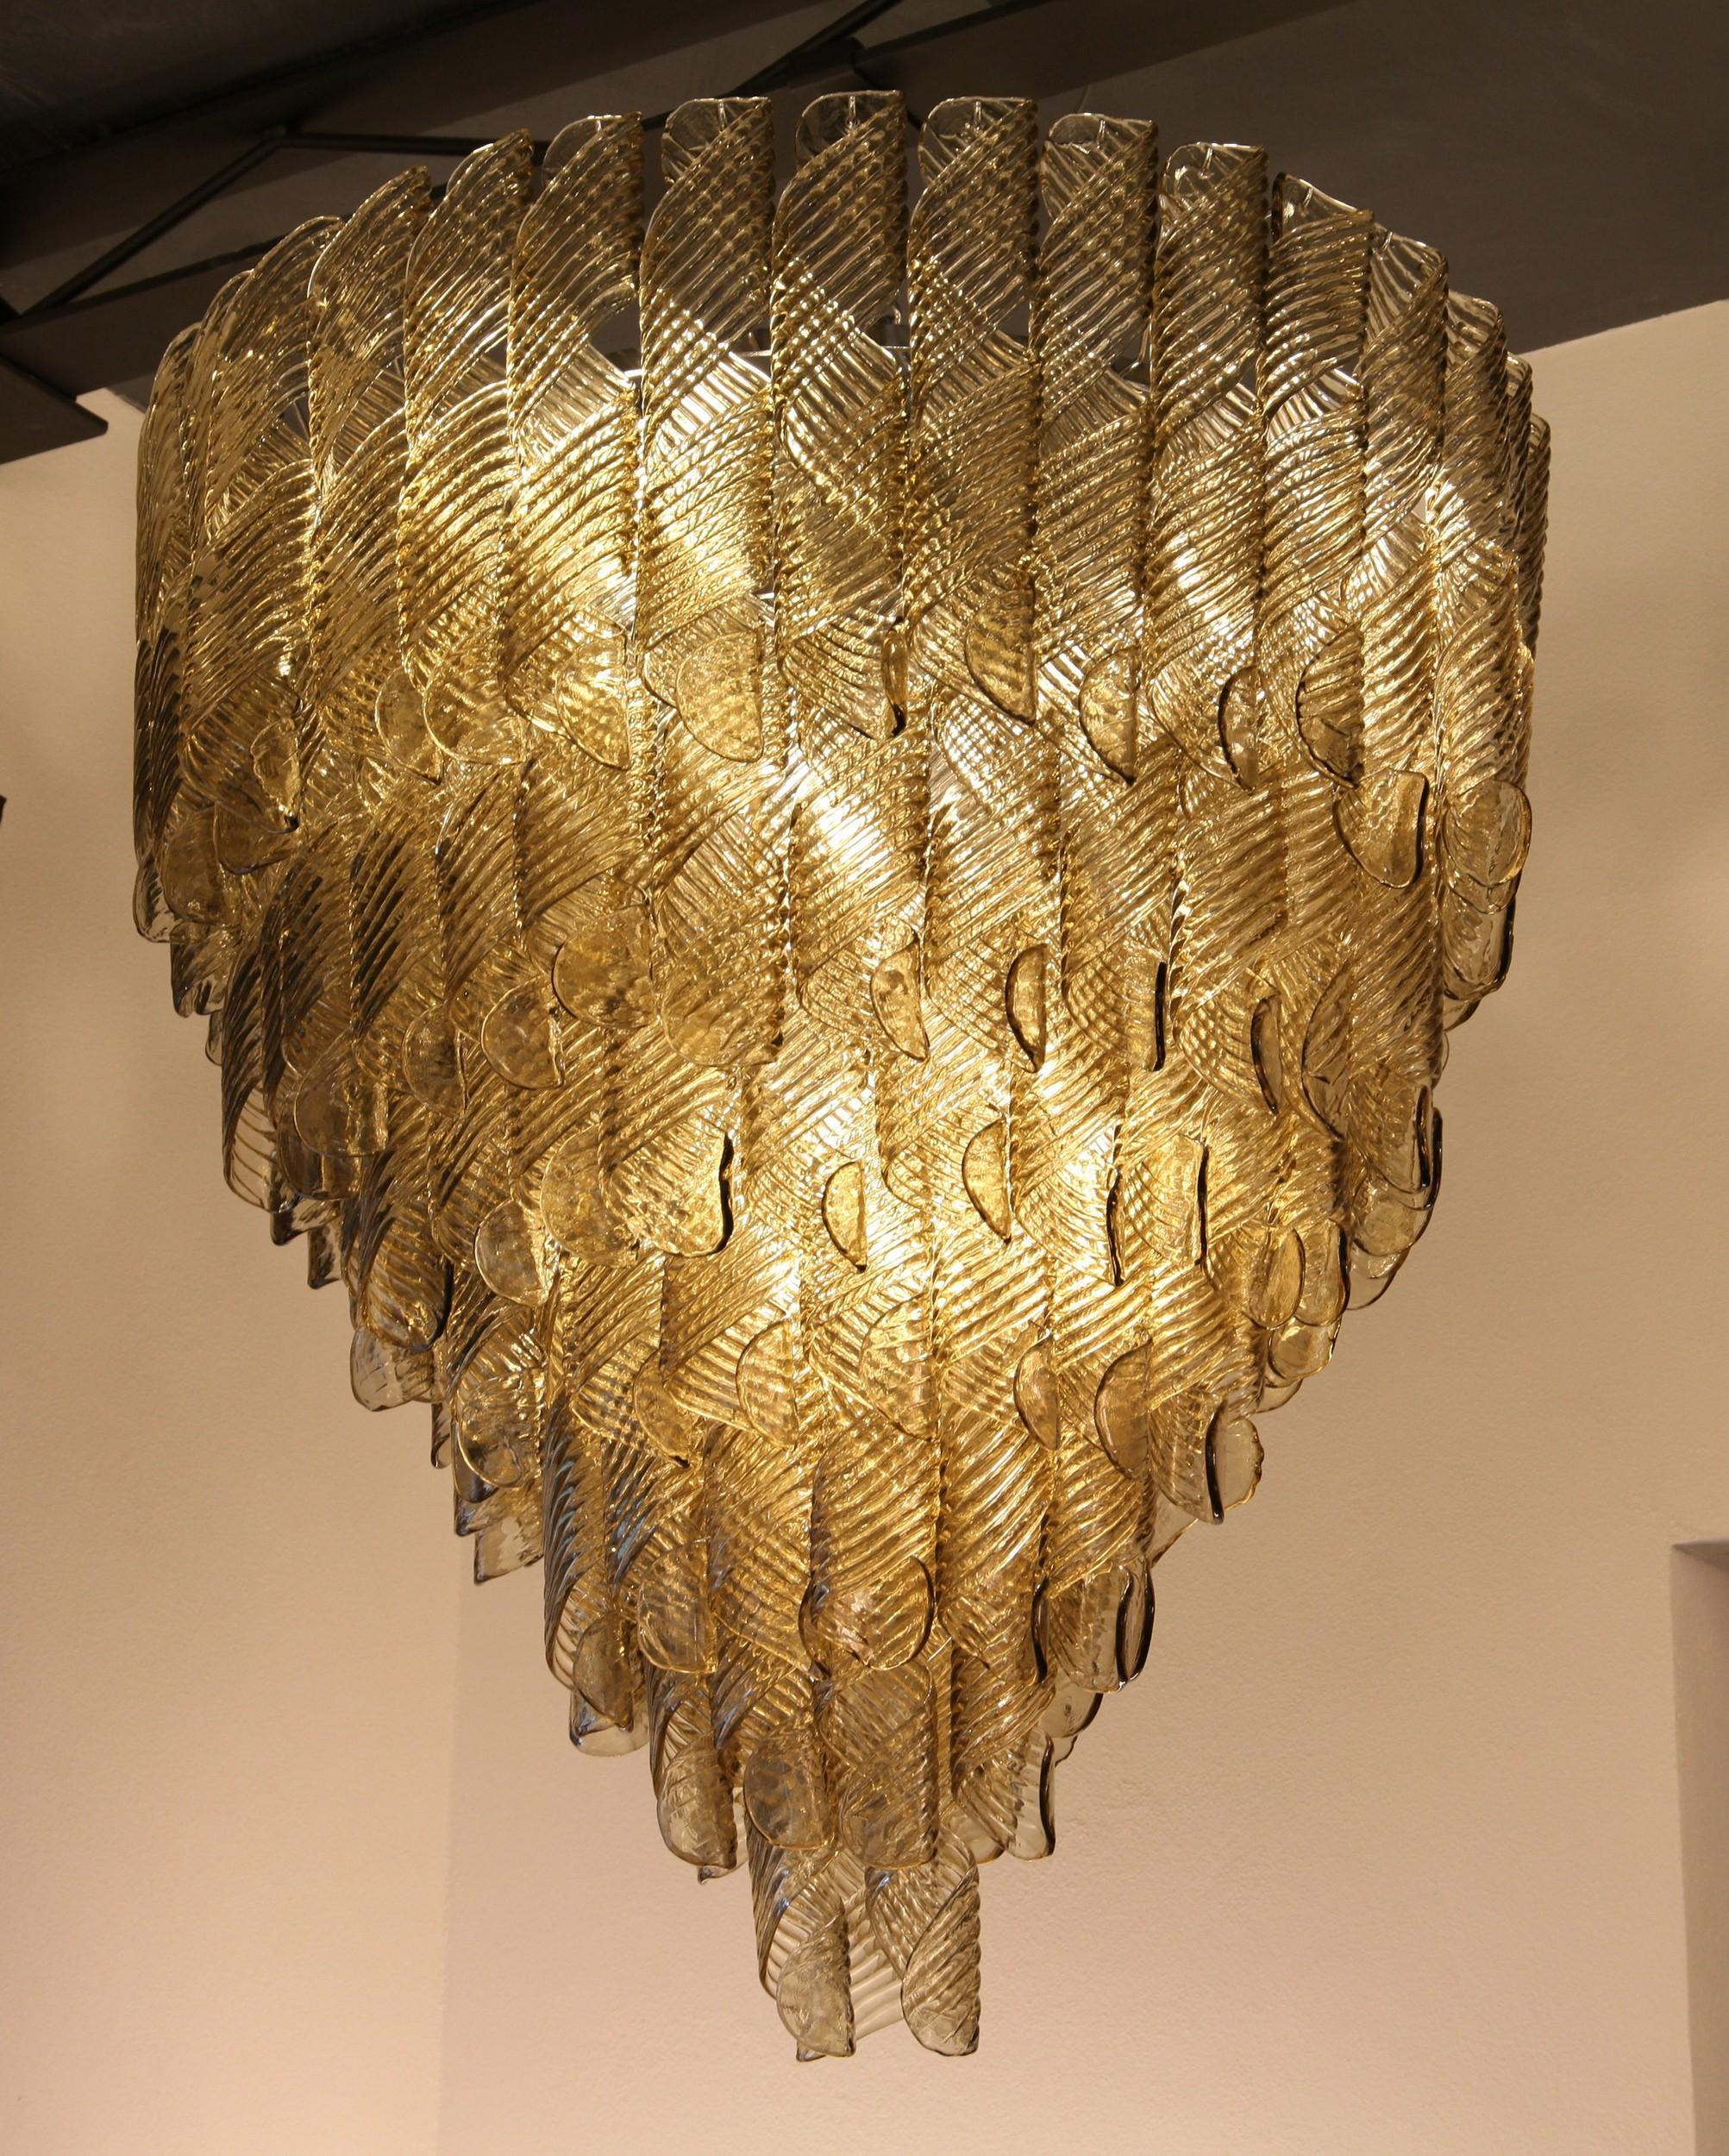 Monumental Chandelier, Murano Fume Glass in Spiral Ribbed Elements, 7 Tiers 8